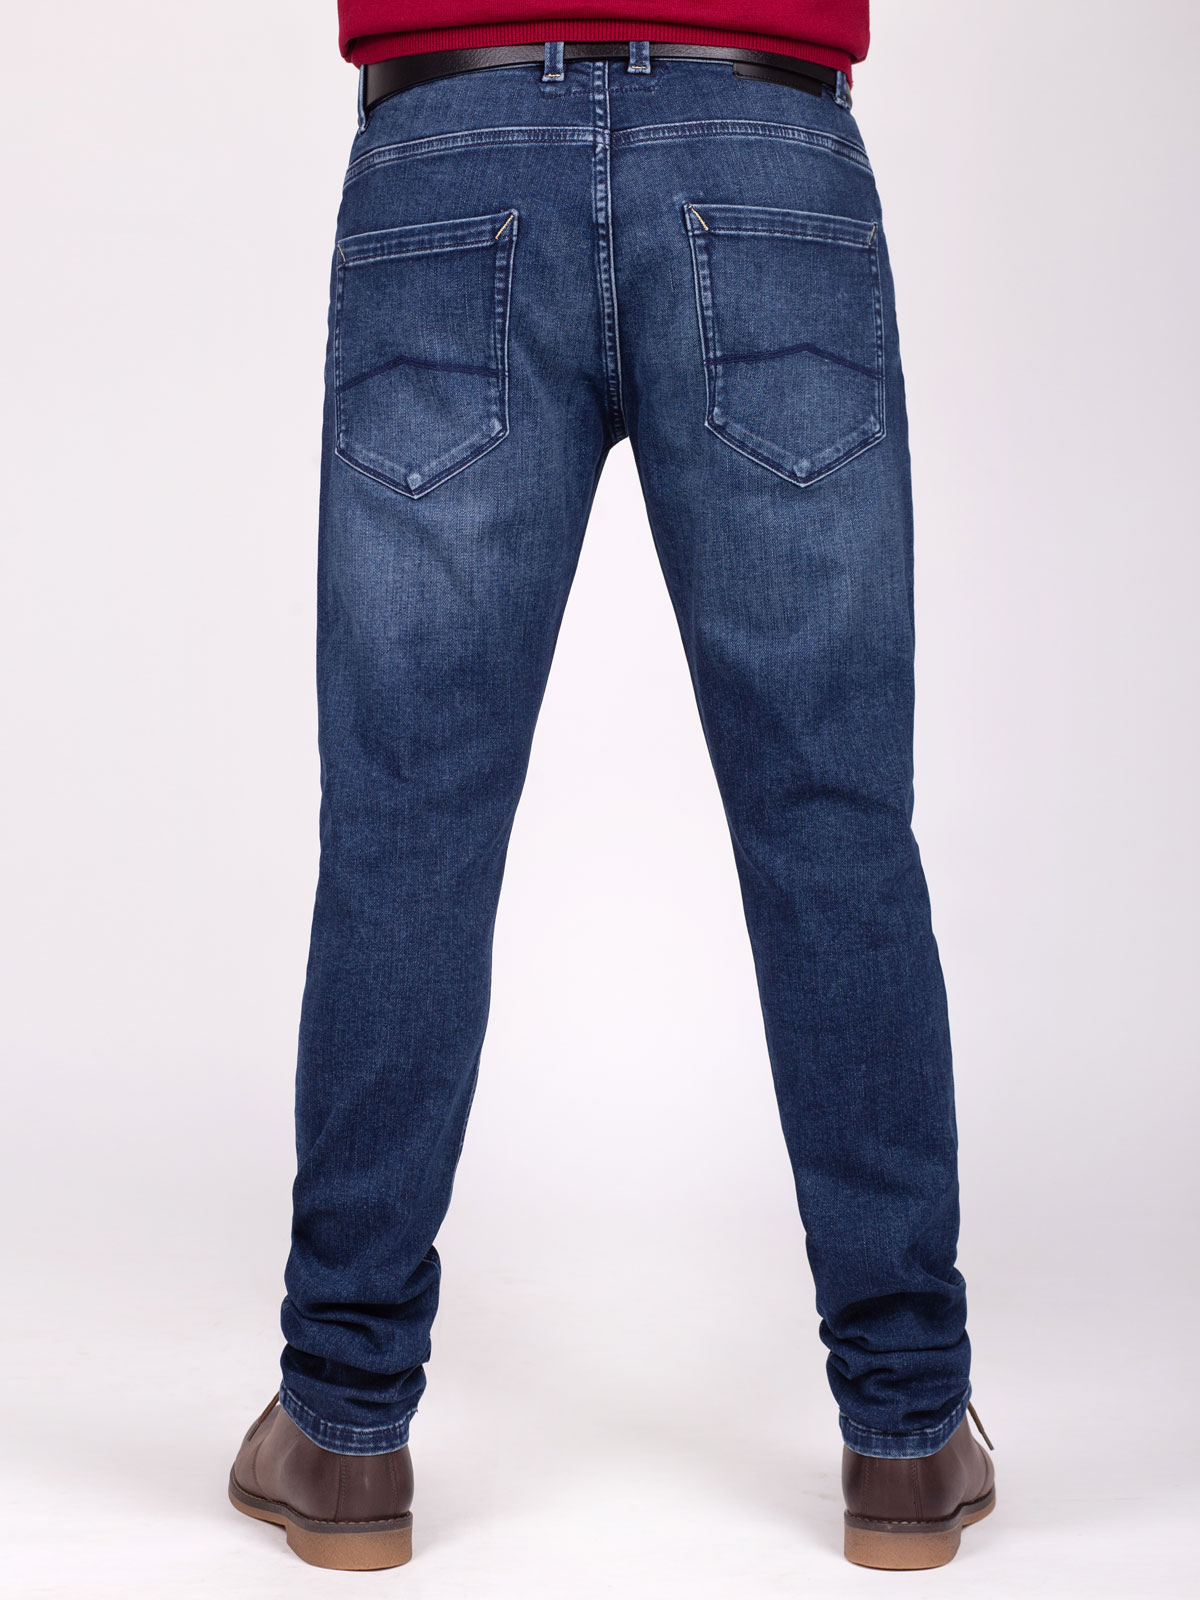 Jeans in indigo with a slight trit effec - 62155 € 50.06 img3